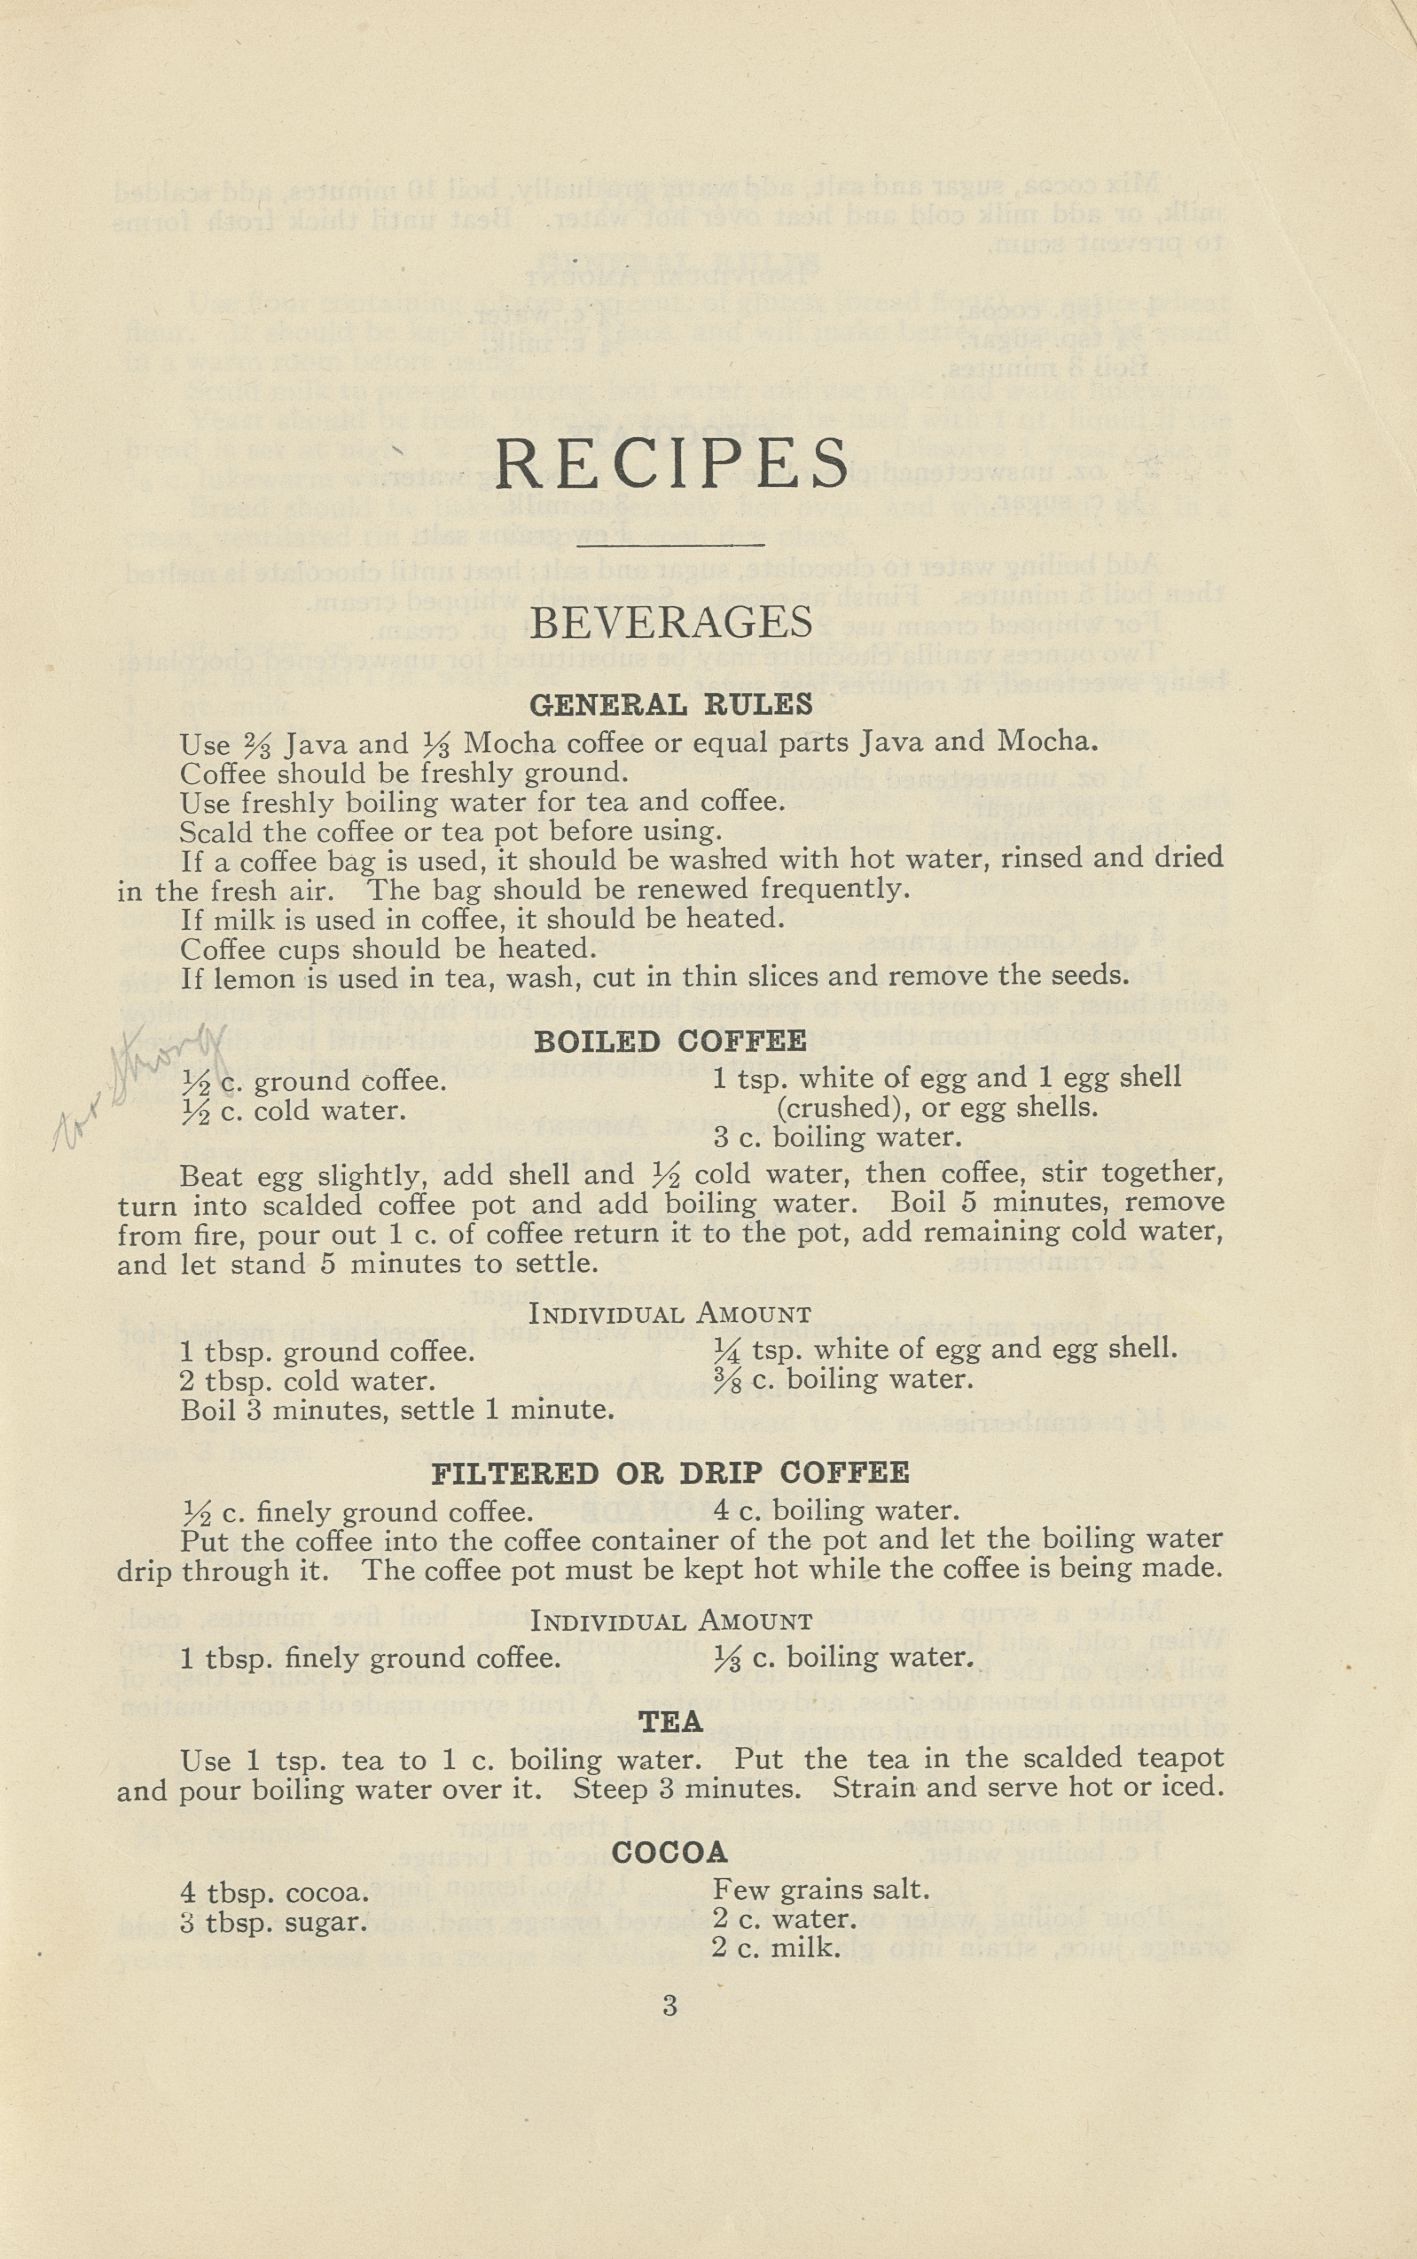 Page 3 of The Household Science Book of Recipes which discusses coffee, including the Boiled Coffee using egg.